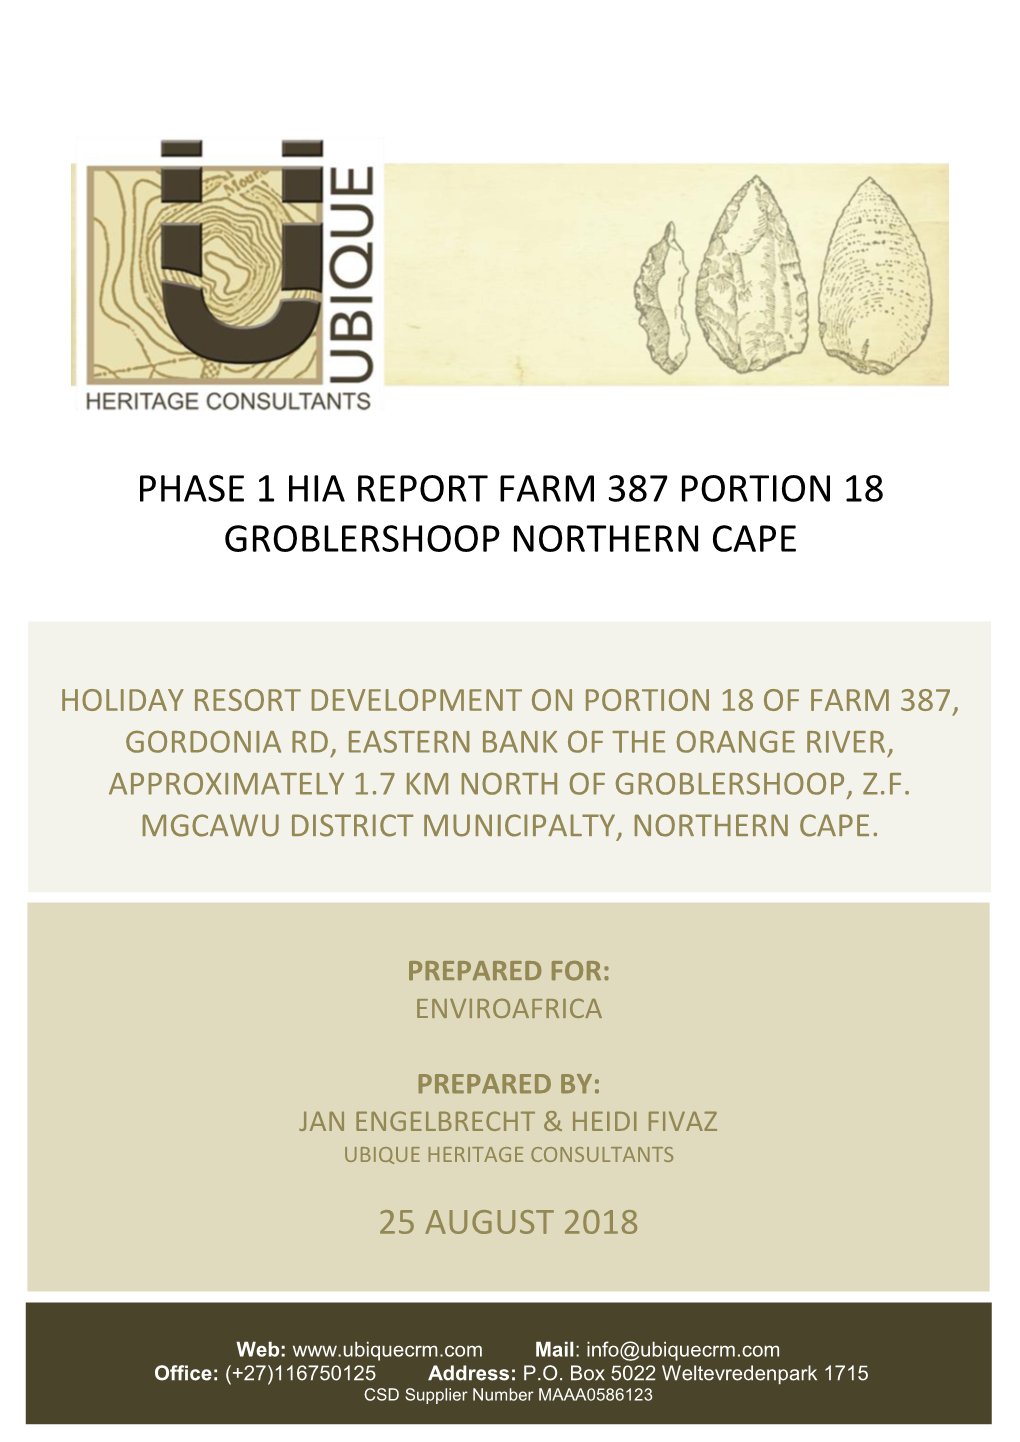 Phase 1 Hia Report Farm 387 Portion 18 Groblershoop Northern Cape